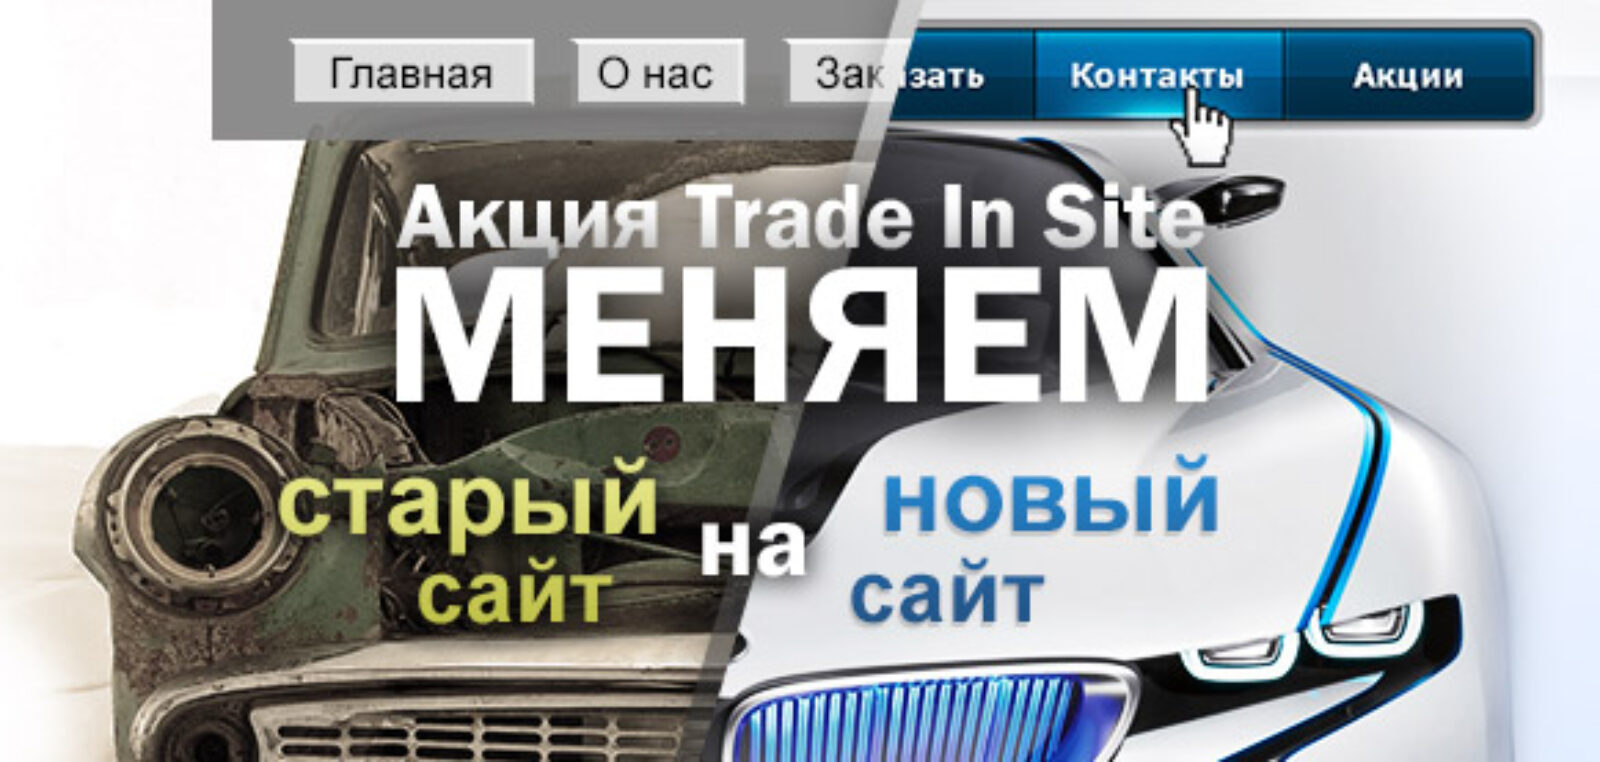 Акция Trade In Site